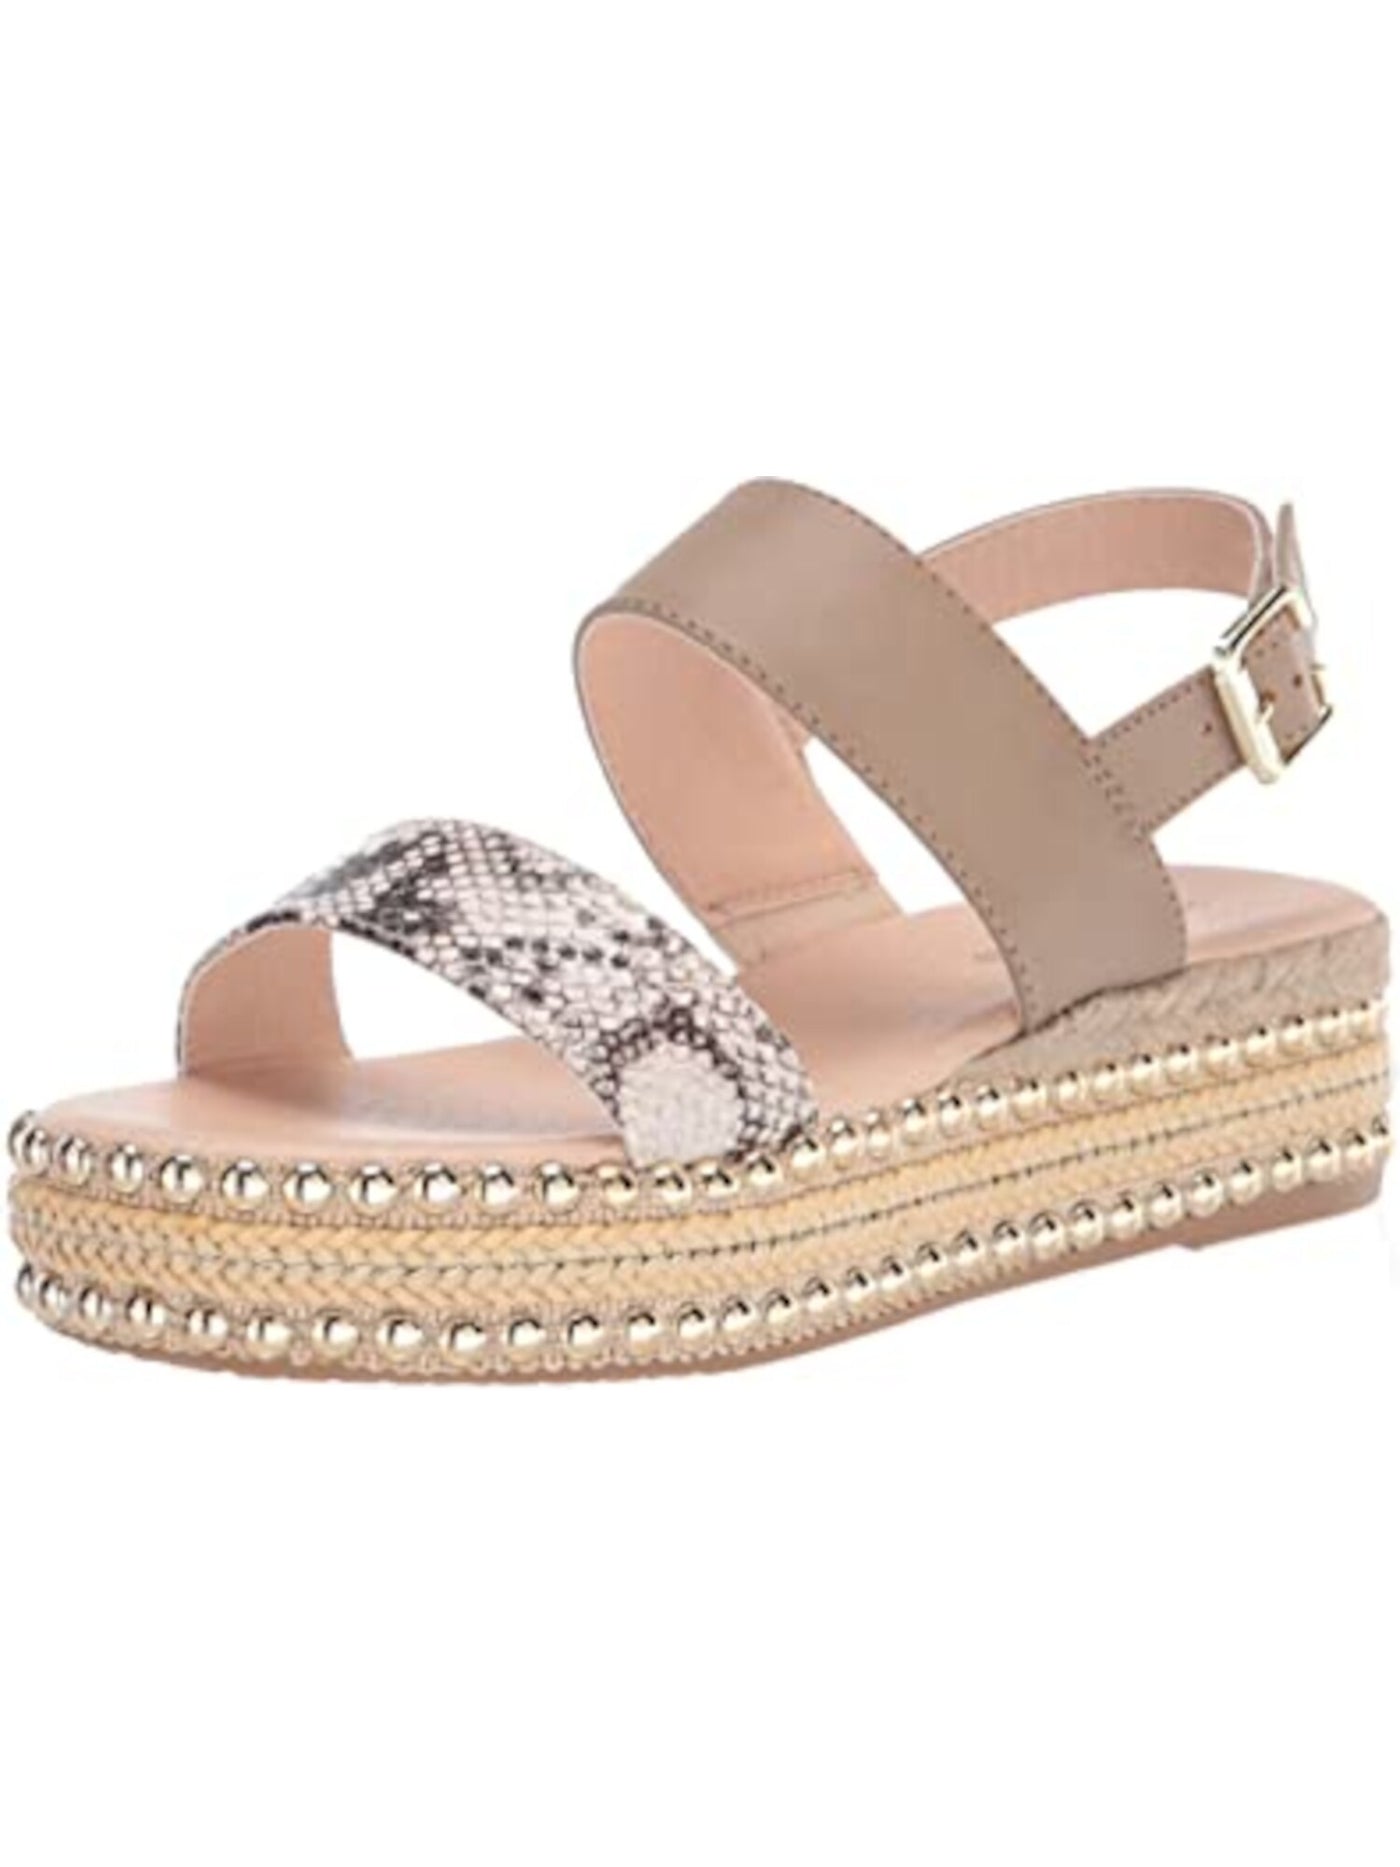 SEVEN DIALS Womens Beige Snake Print Padded Strappy Woven Detailing Studded Adjustable Strap Berenice Round Toe Platform Buckle Espadrille Shoes 5.5 M